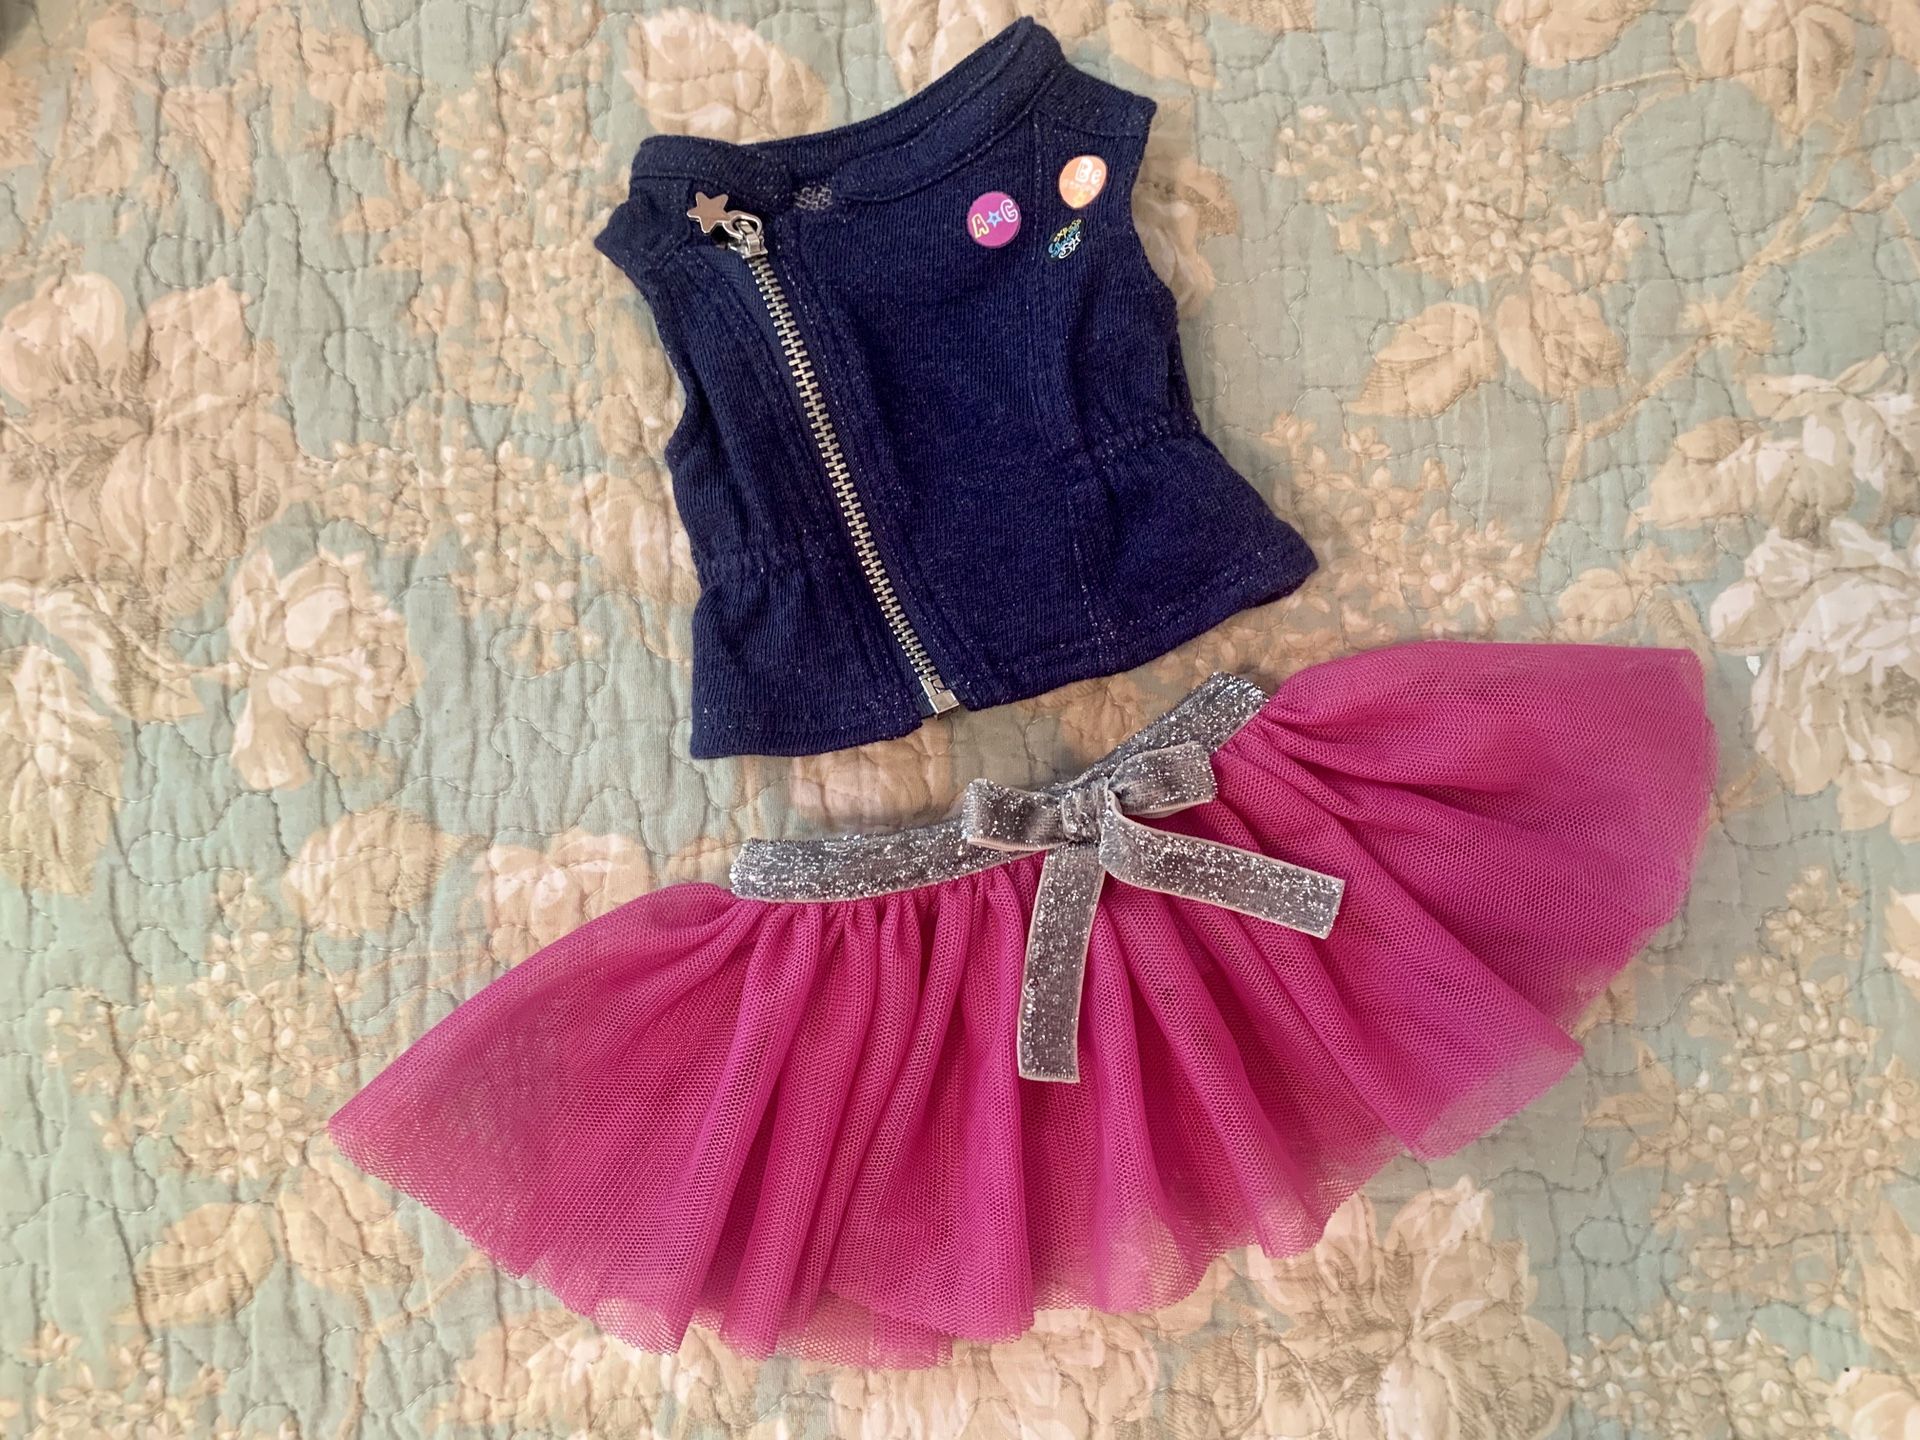 American Girl Doll “Love To Layer” Outfit